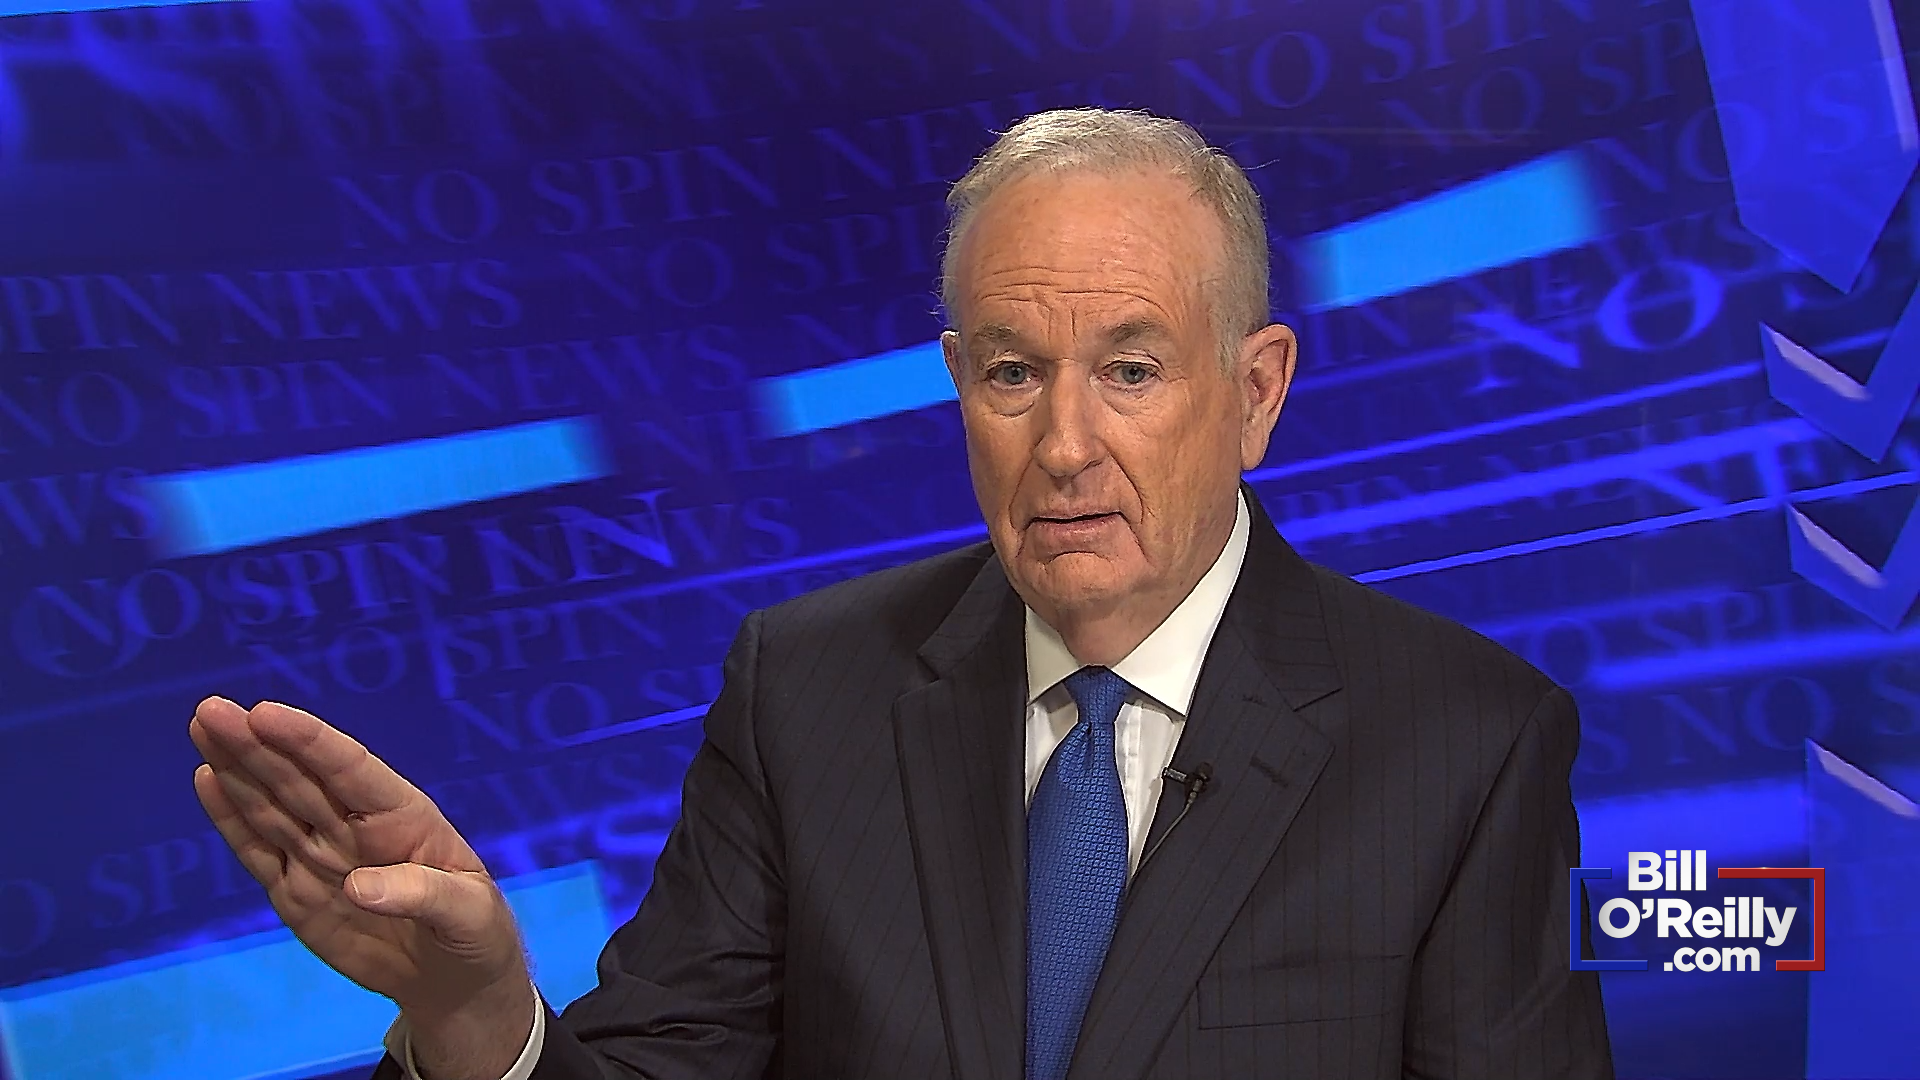 MUST WATCH: The O'Reilly Moment Everyone is Talking About